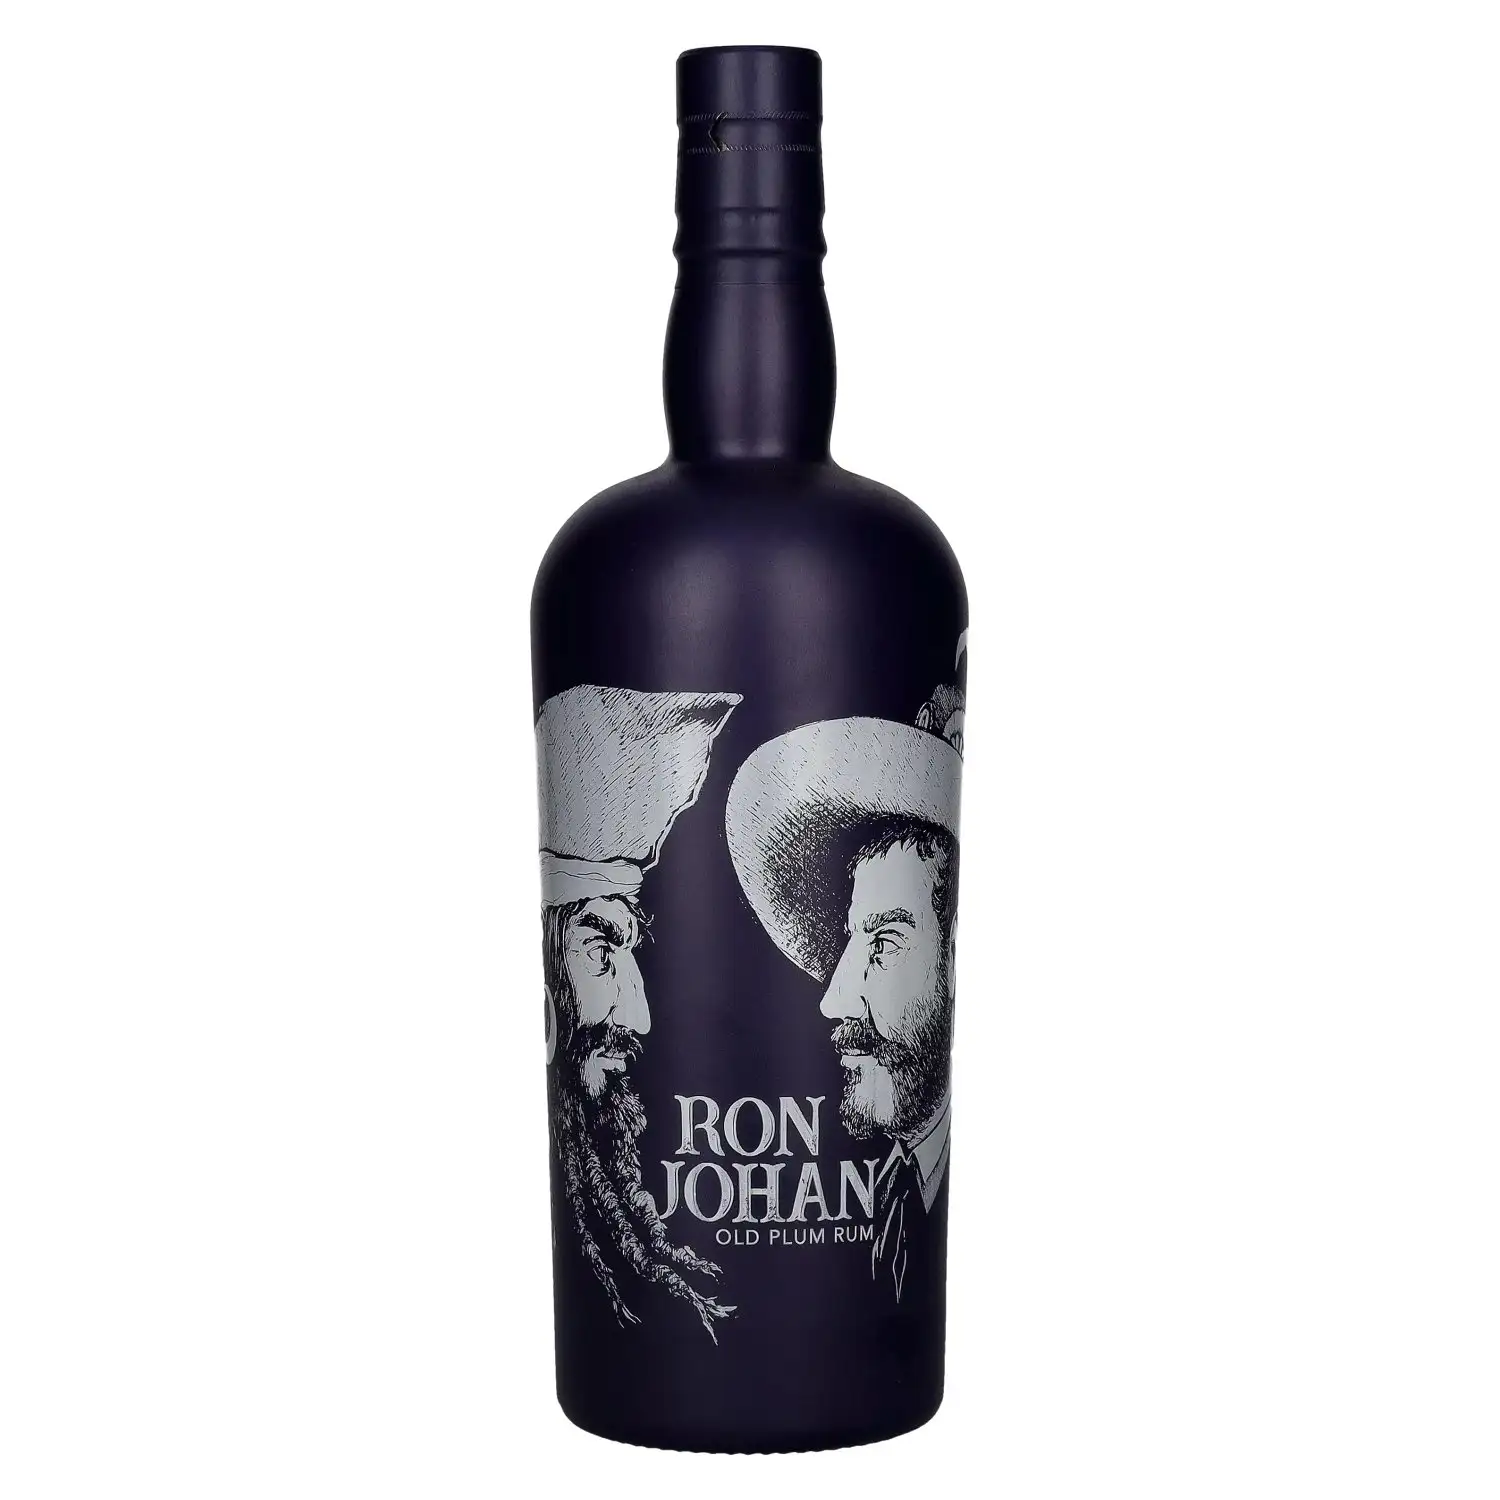 Image of the front of the bottle of the rum Ron Johan Old Plum Rum